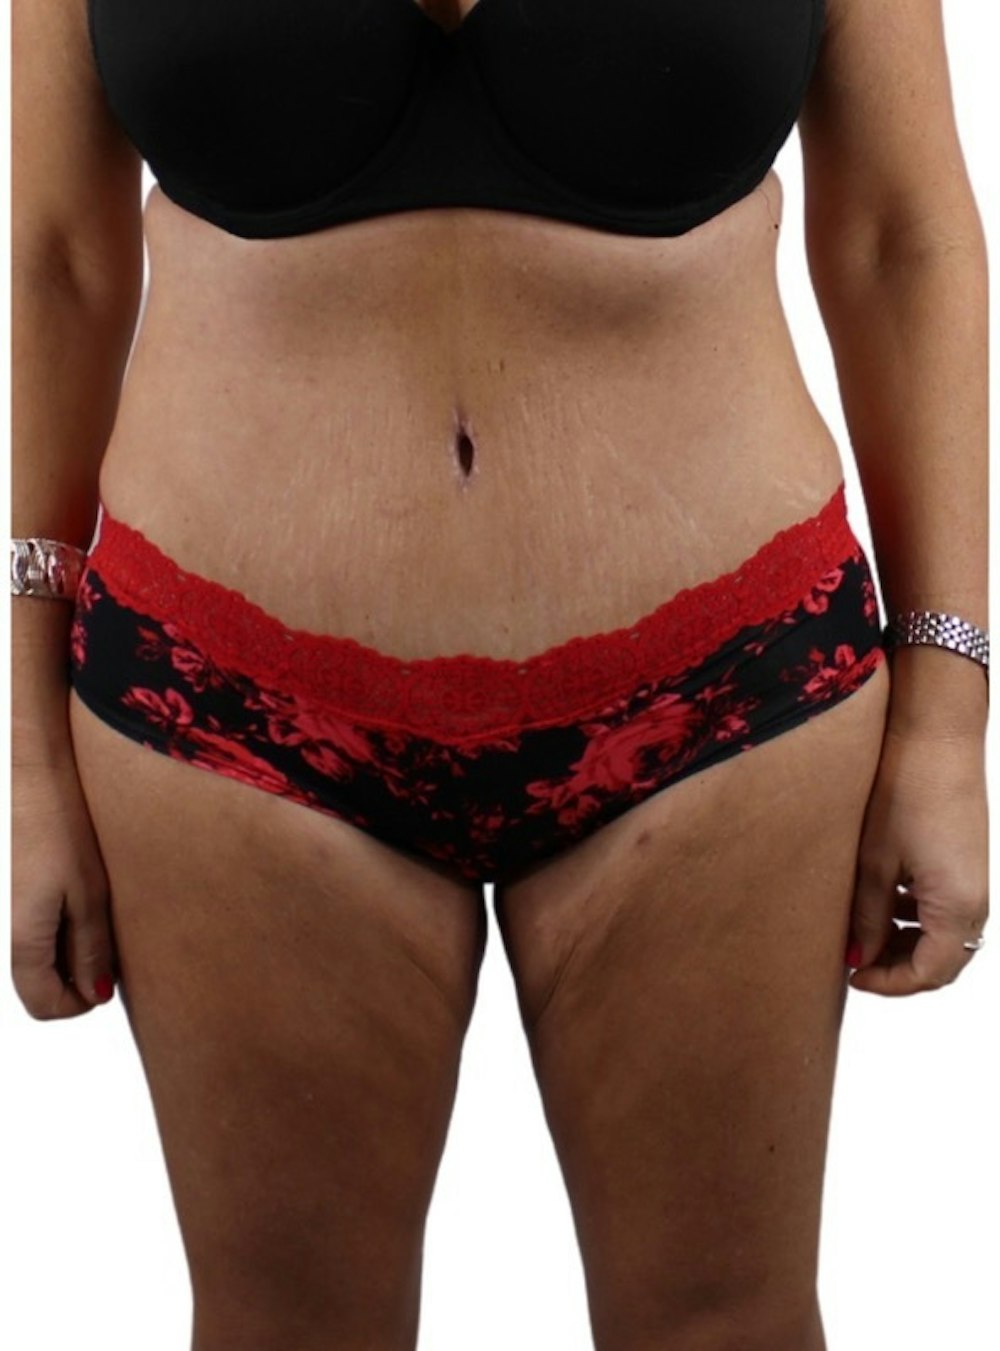 Abdominoplasty Before & After Gallery - Patient 13948279 - Image 2